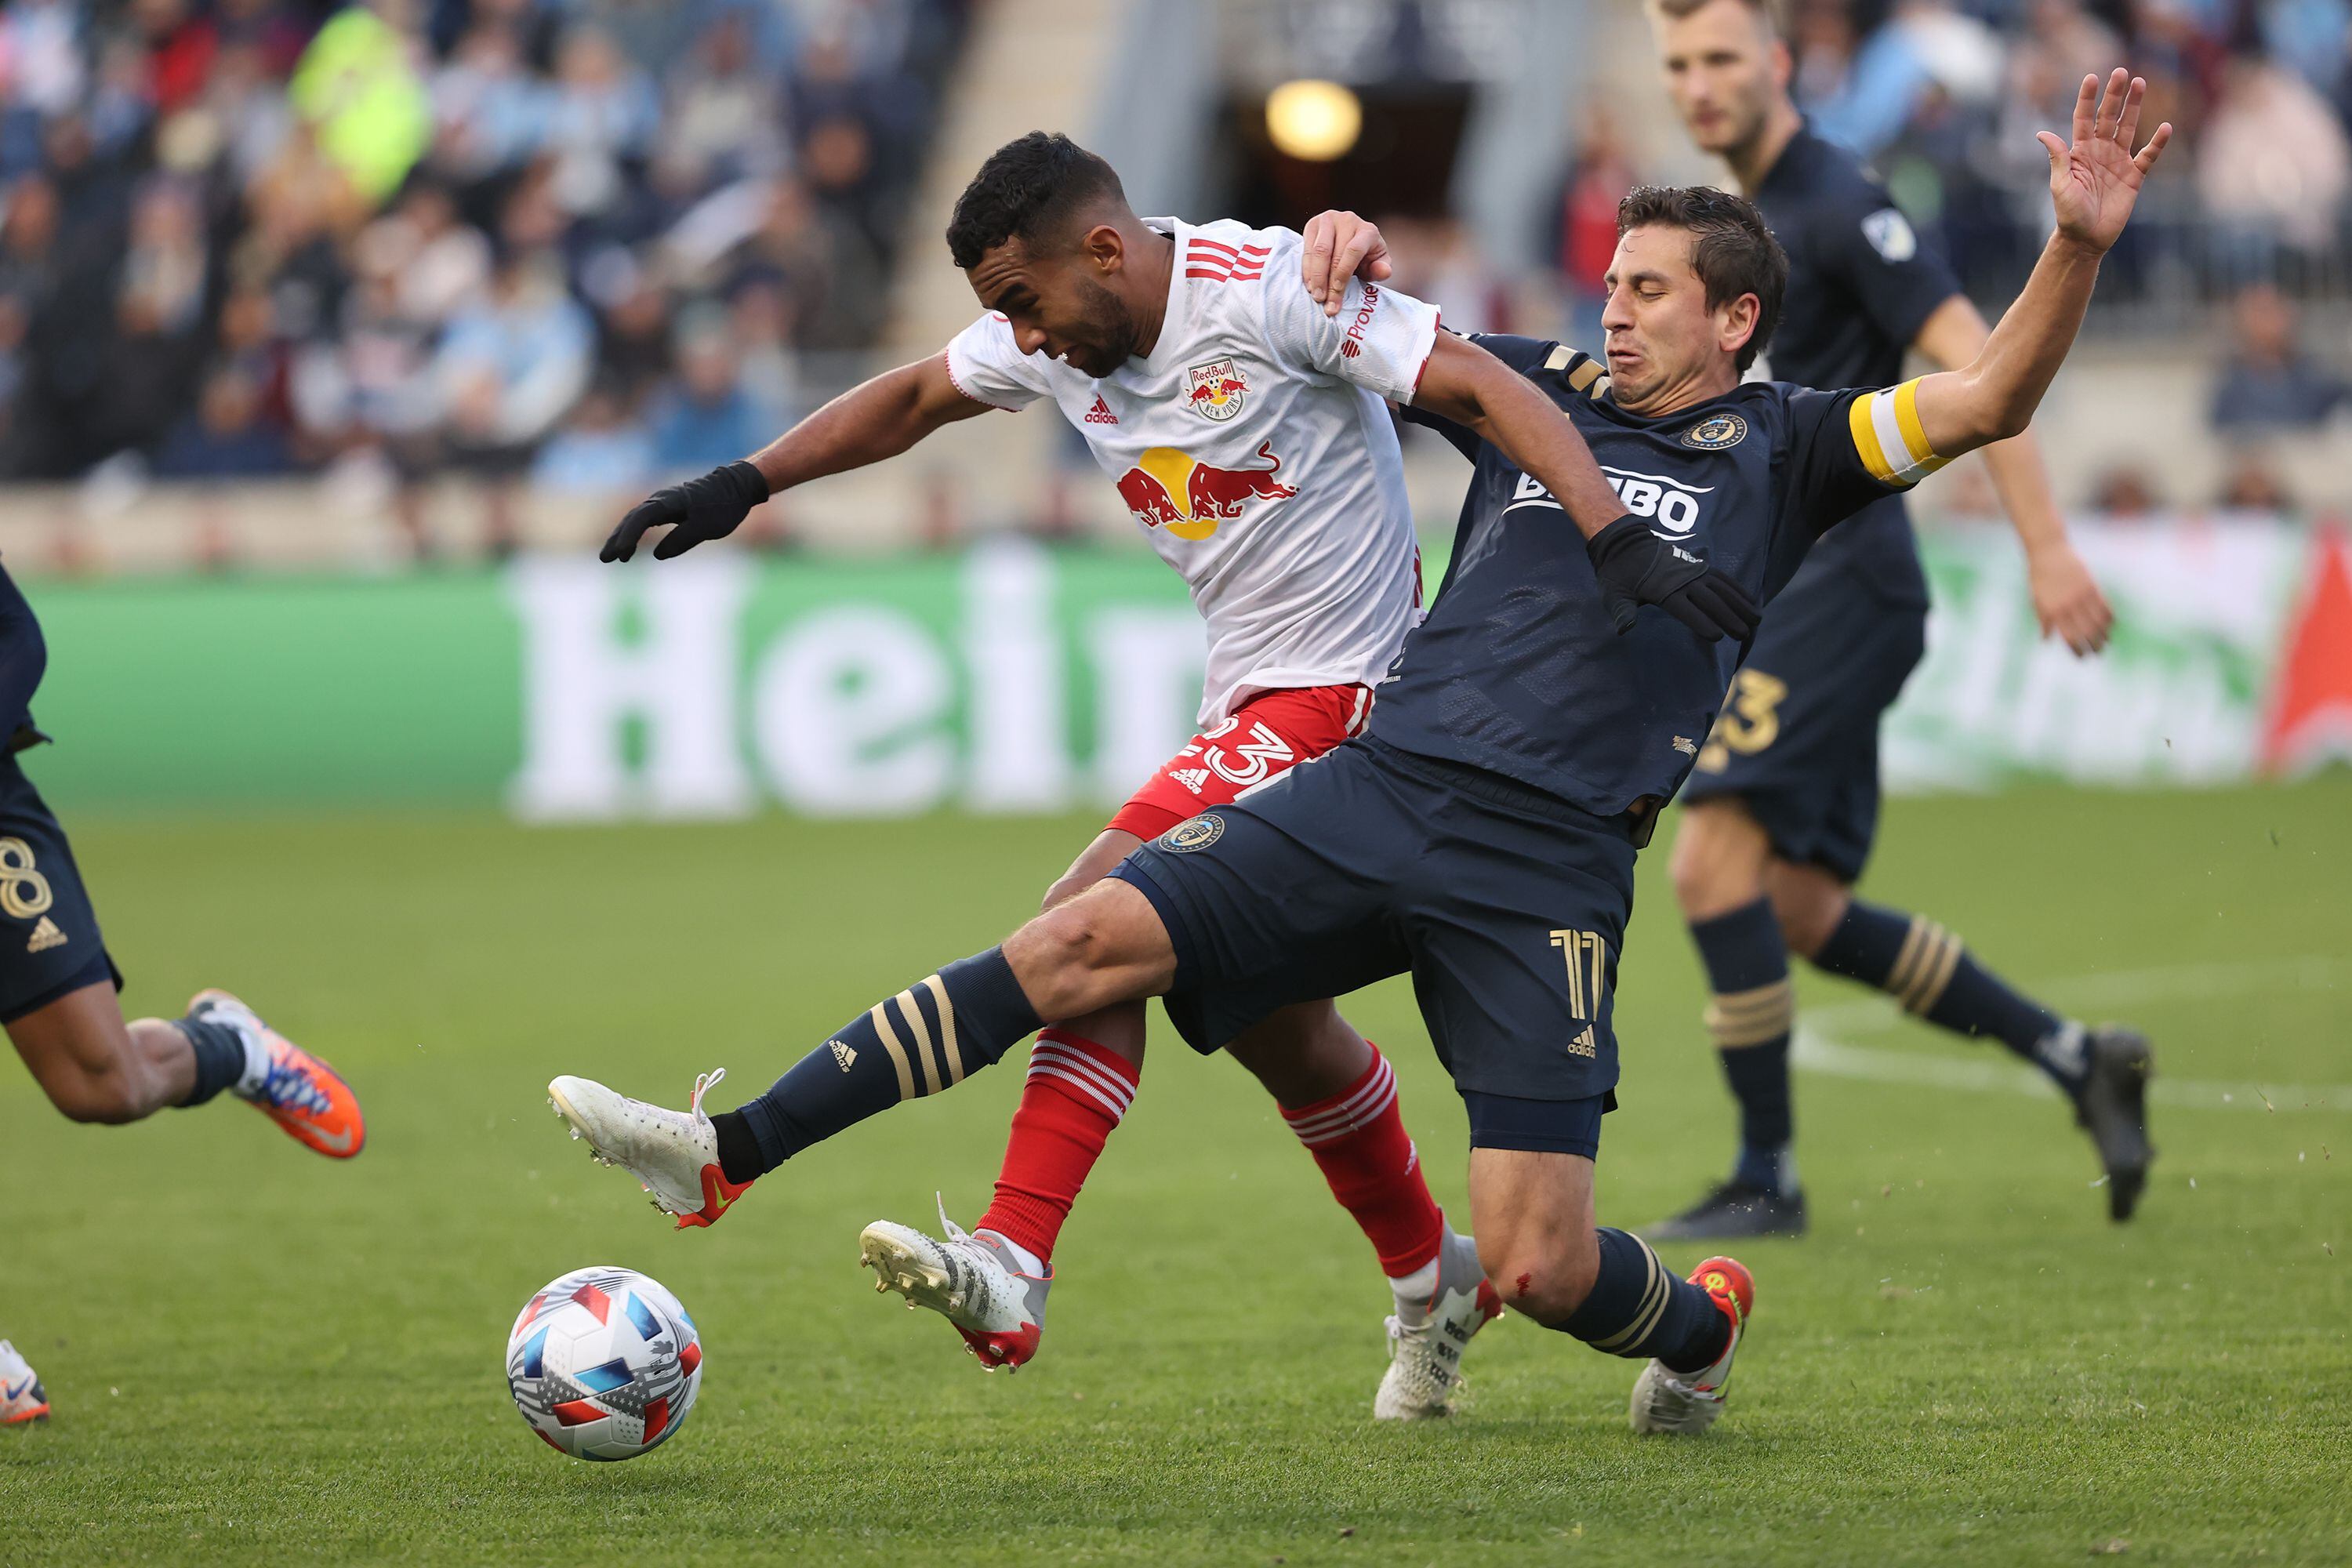 Philadelphia Union Face NYCFC in ECF Missing Key Players in COVID Protocol  - Last Word On Soccer